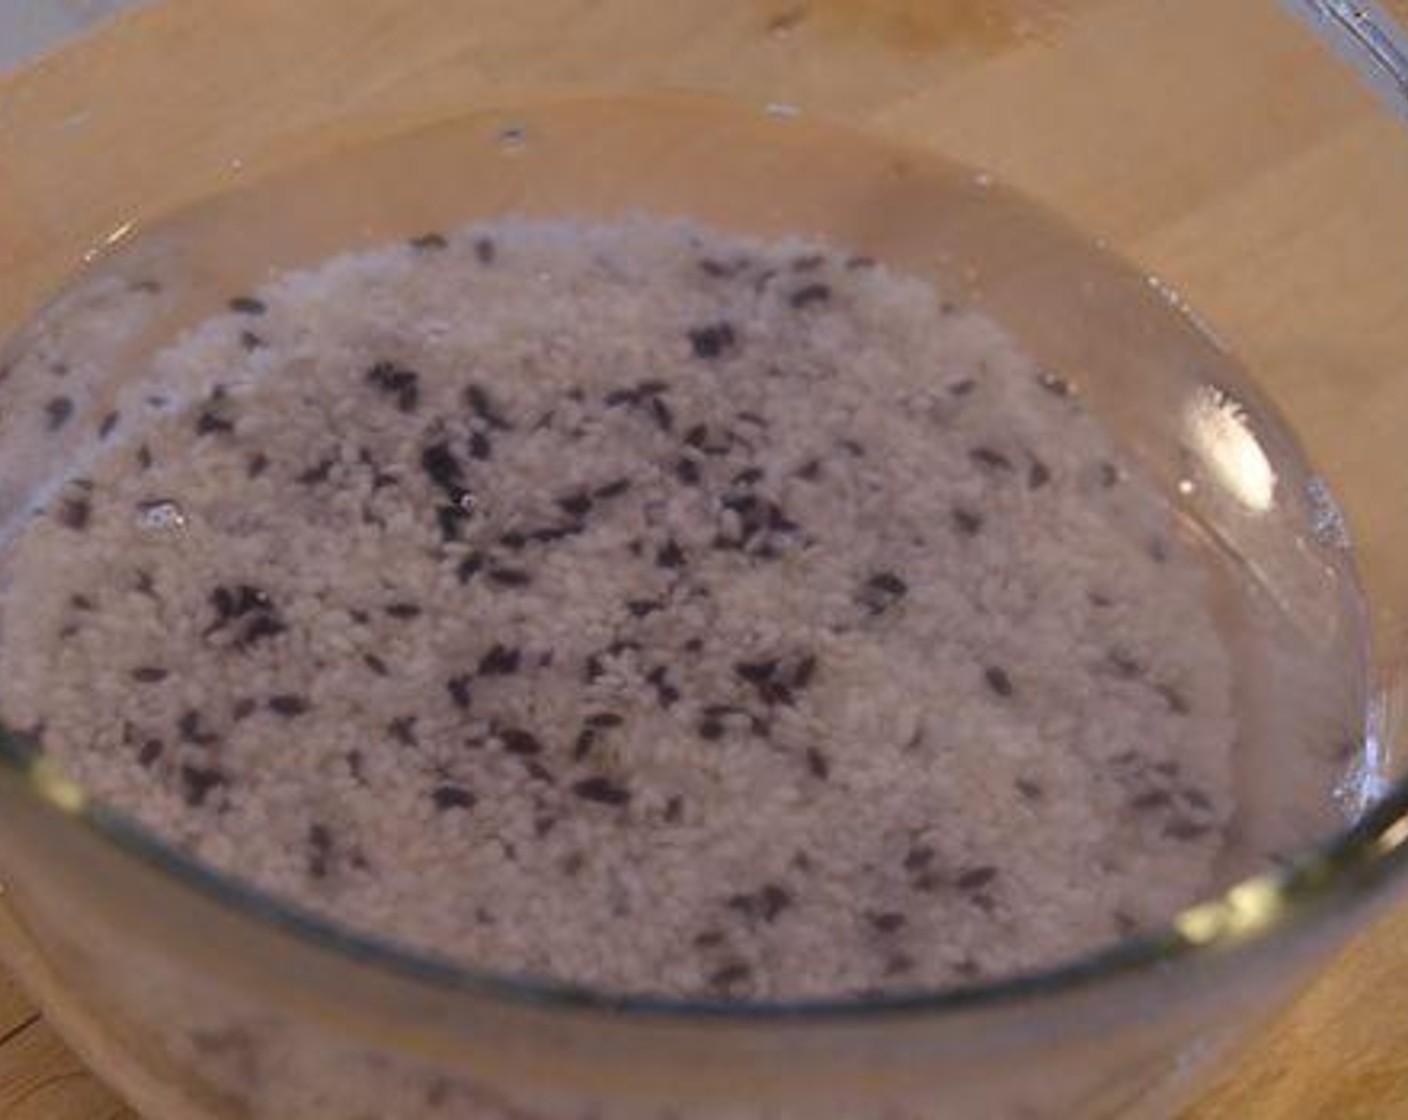 step 1 Soak Black Beans (1/3 cup) in water for 1 hour. Combine Short Grain White Rice (1 1/2 cups), Glutinous Rice (1/2 cup), Black Rice (2 Tbsp), and rinse them until the water gets clear, then soak in the water for 1 hour as well. Drain the water and combine rices and beans in the rice cooker.